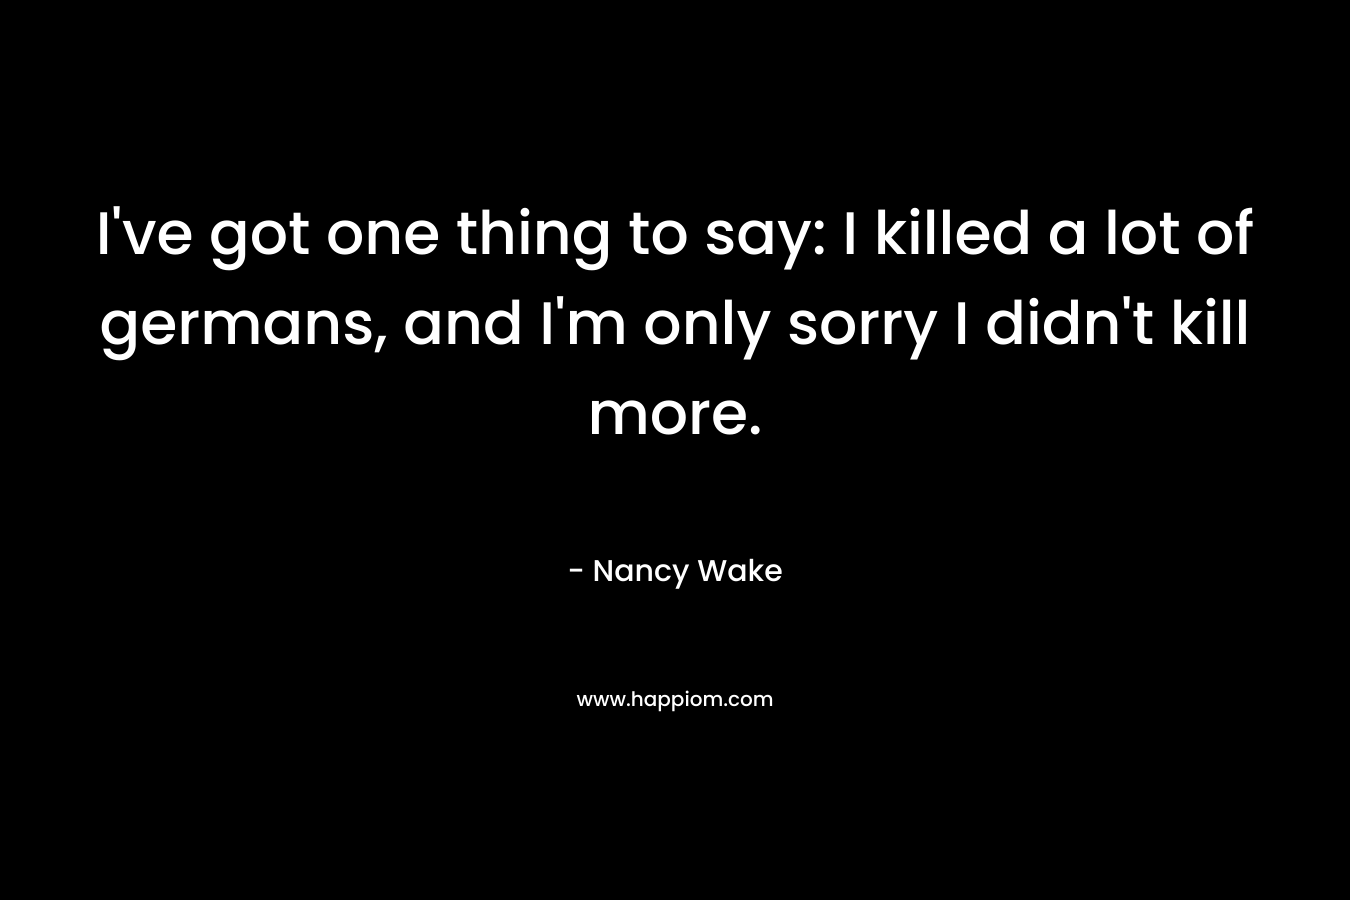 I’ve got one thing to say: I killed a lot of germans, and I’m only sorry I didn’t kill more. – Nancy Wake